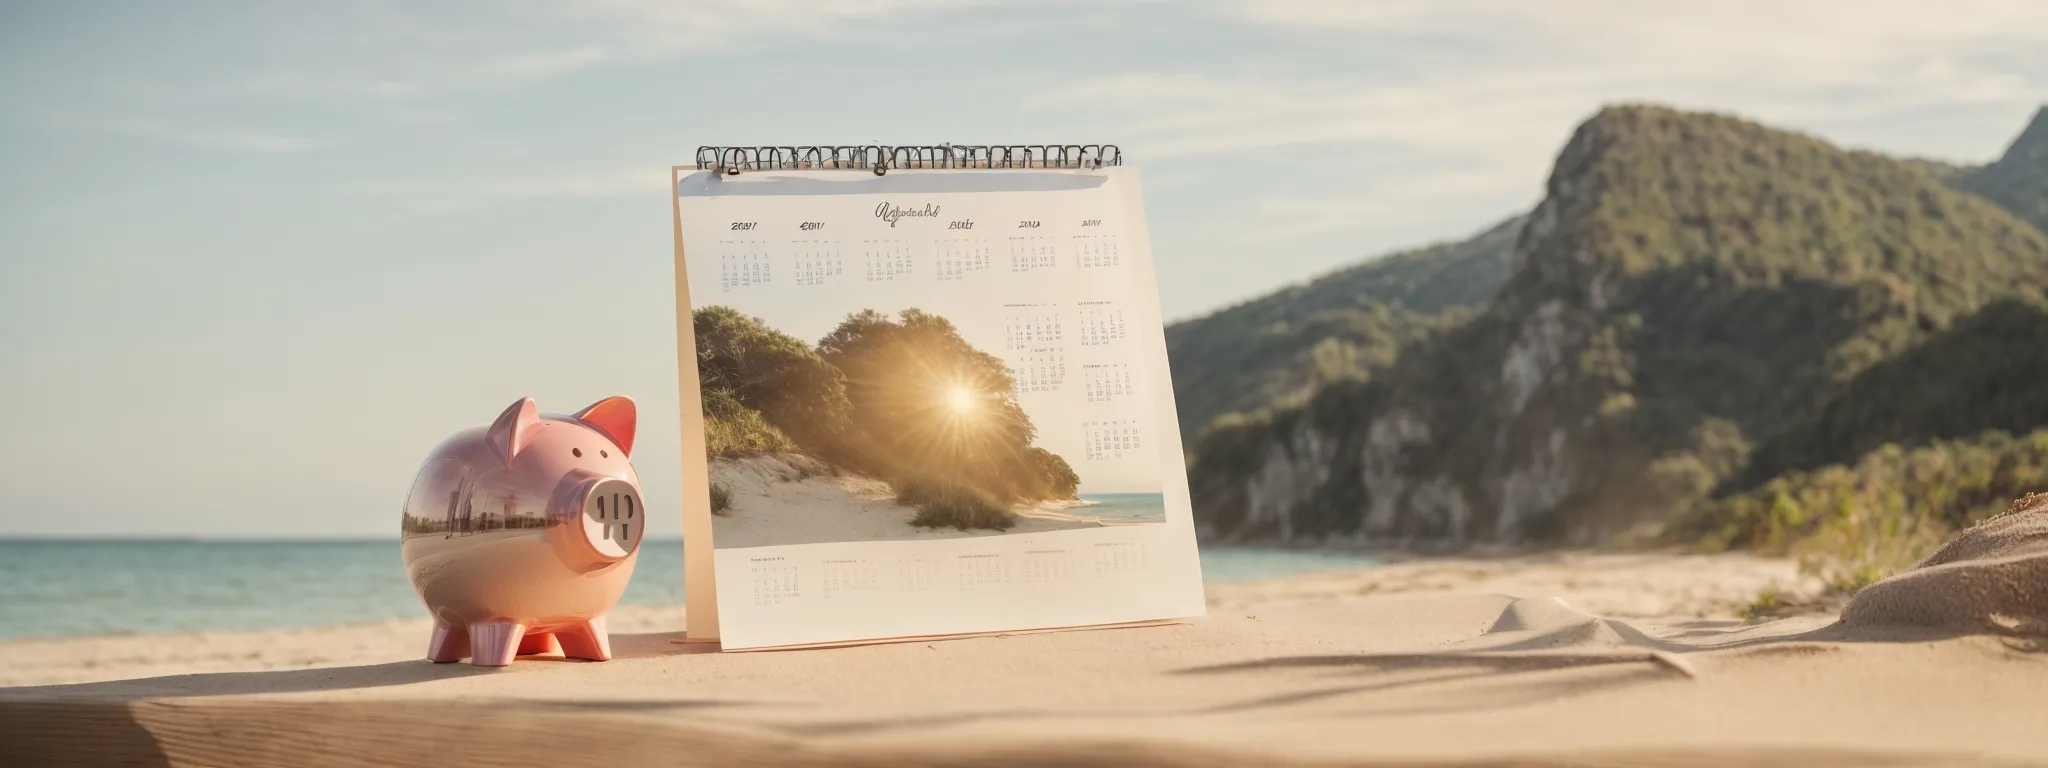 a calendar beside a piggy bank on a table, with a sunny beach landscape in the backdrop.